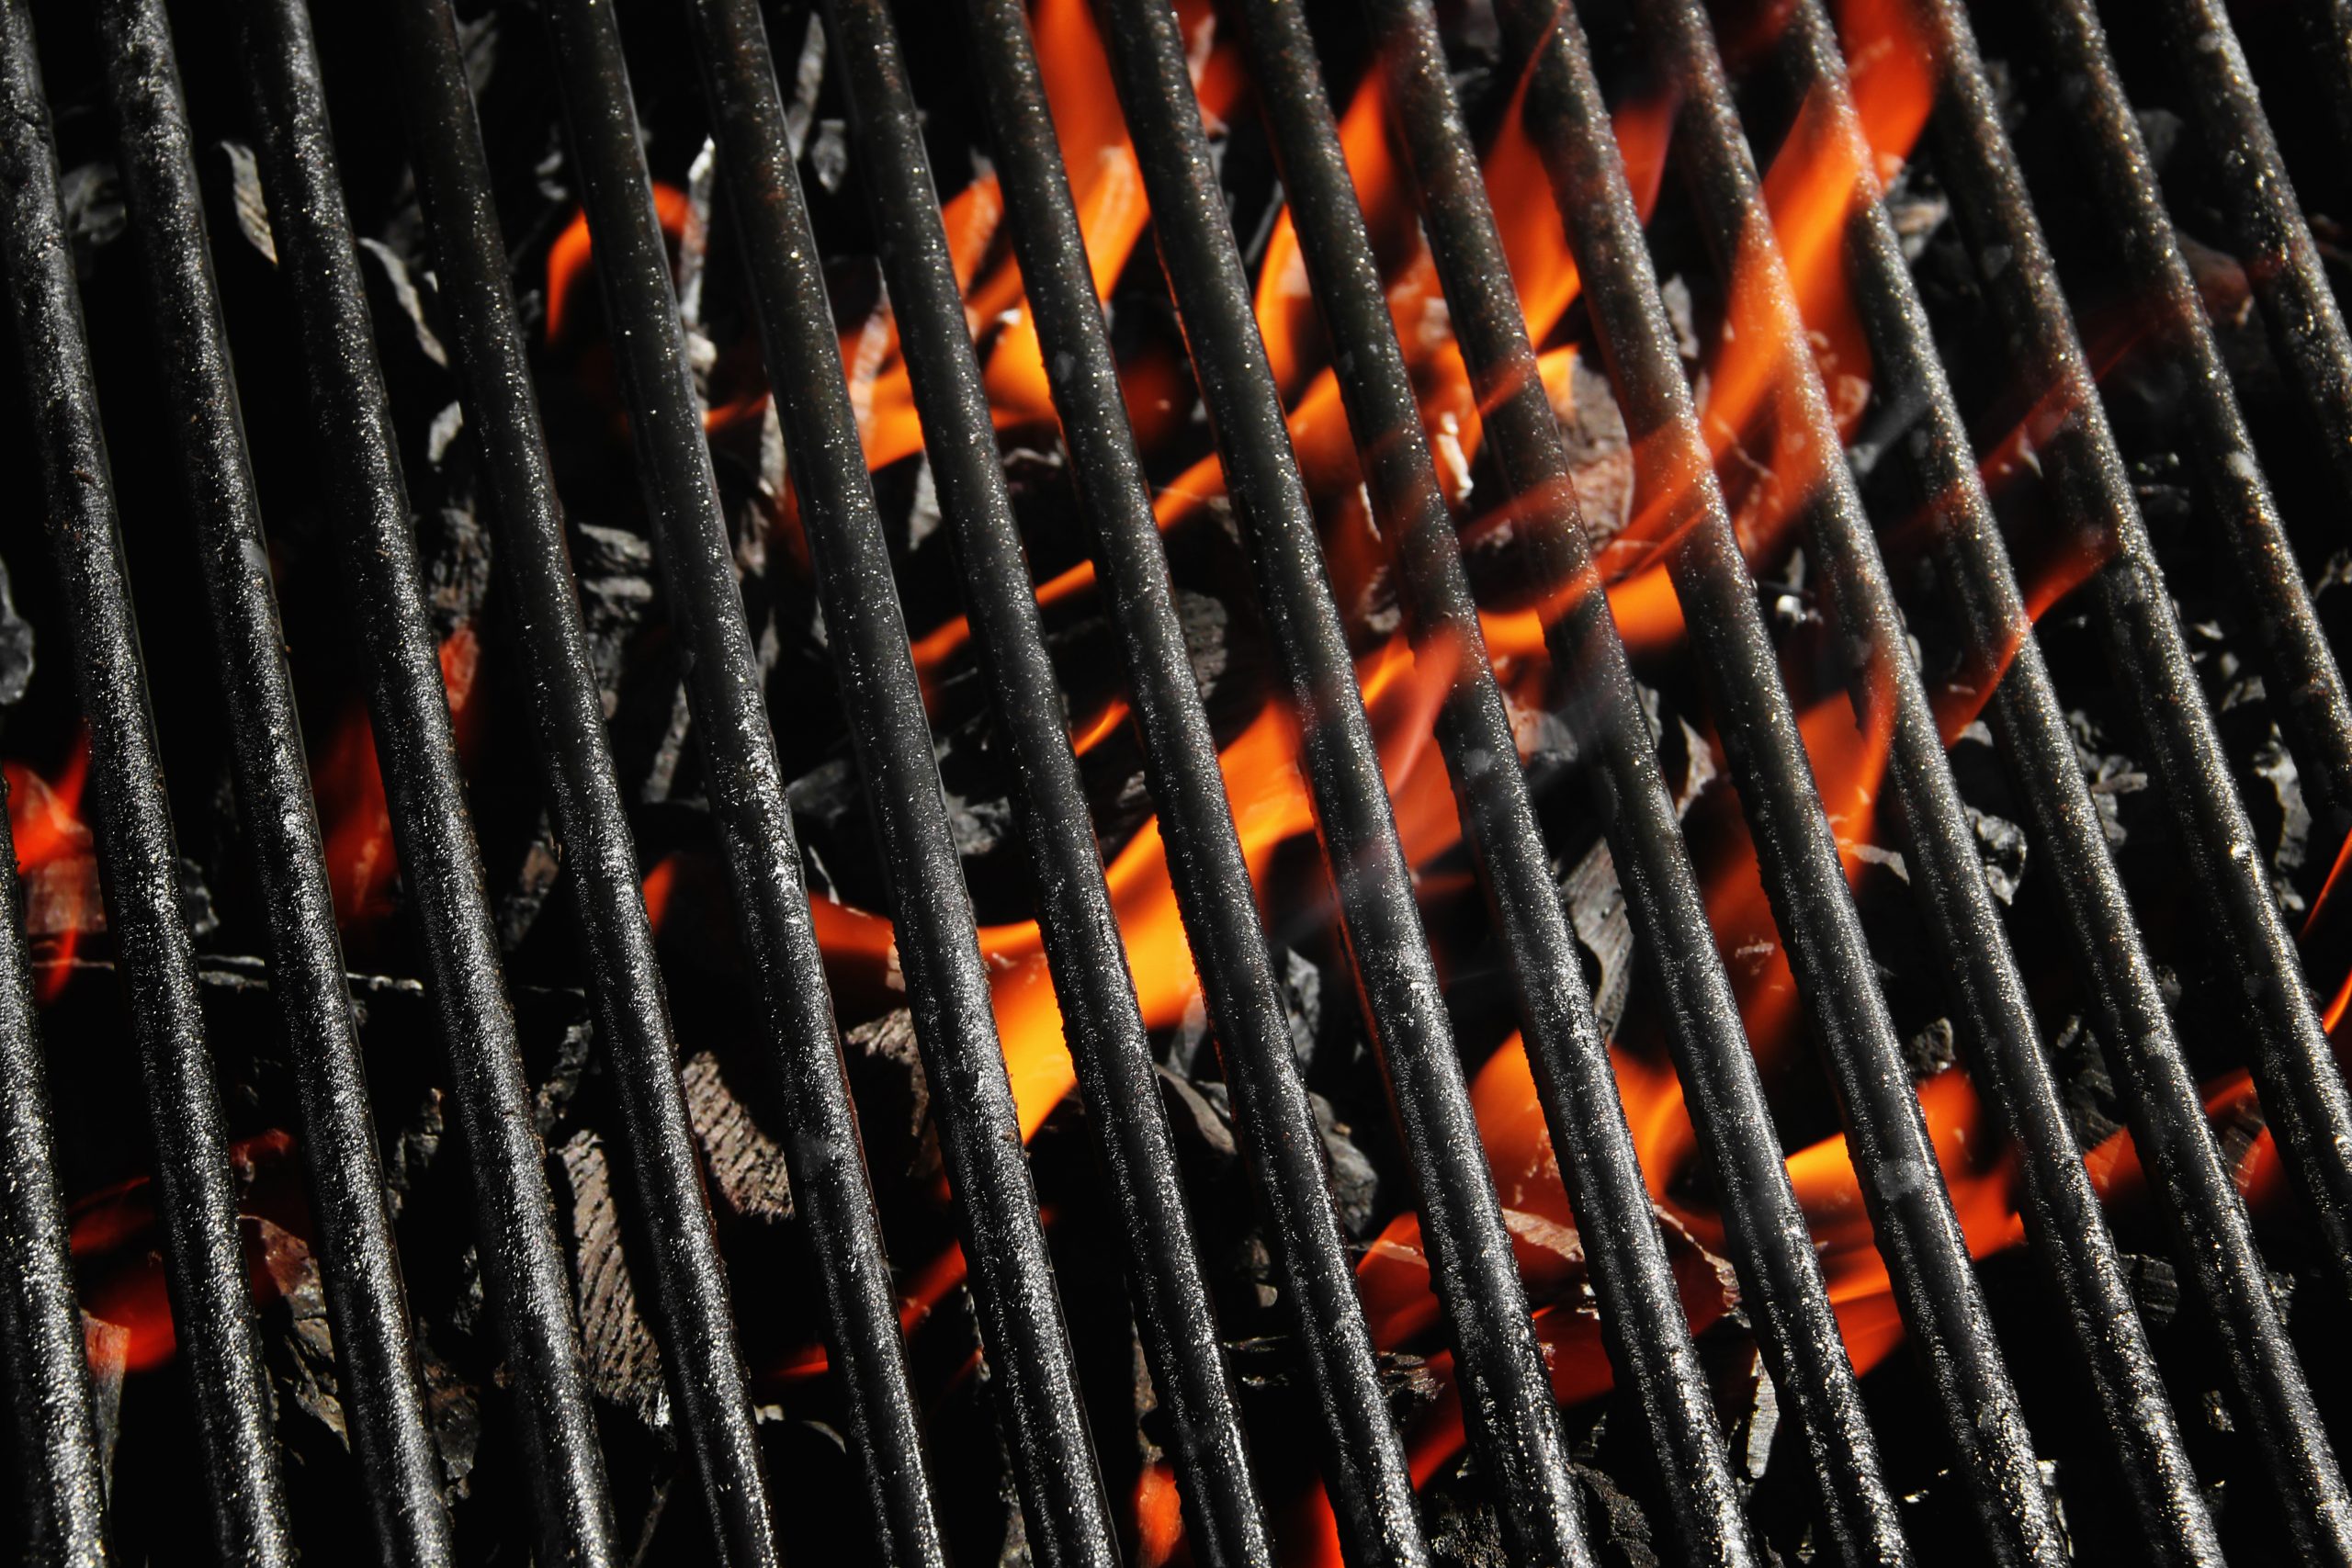 Entrepreneur’s Guide on How to Open a BBQ Restaurant